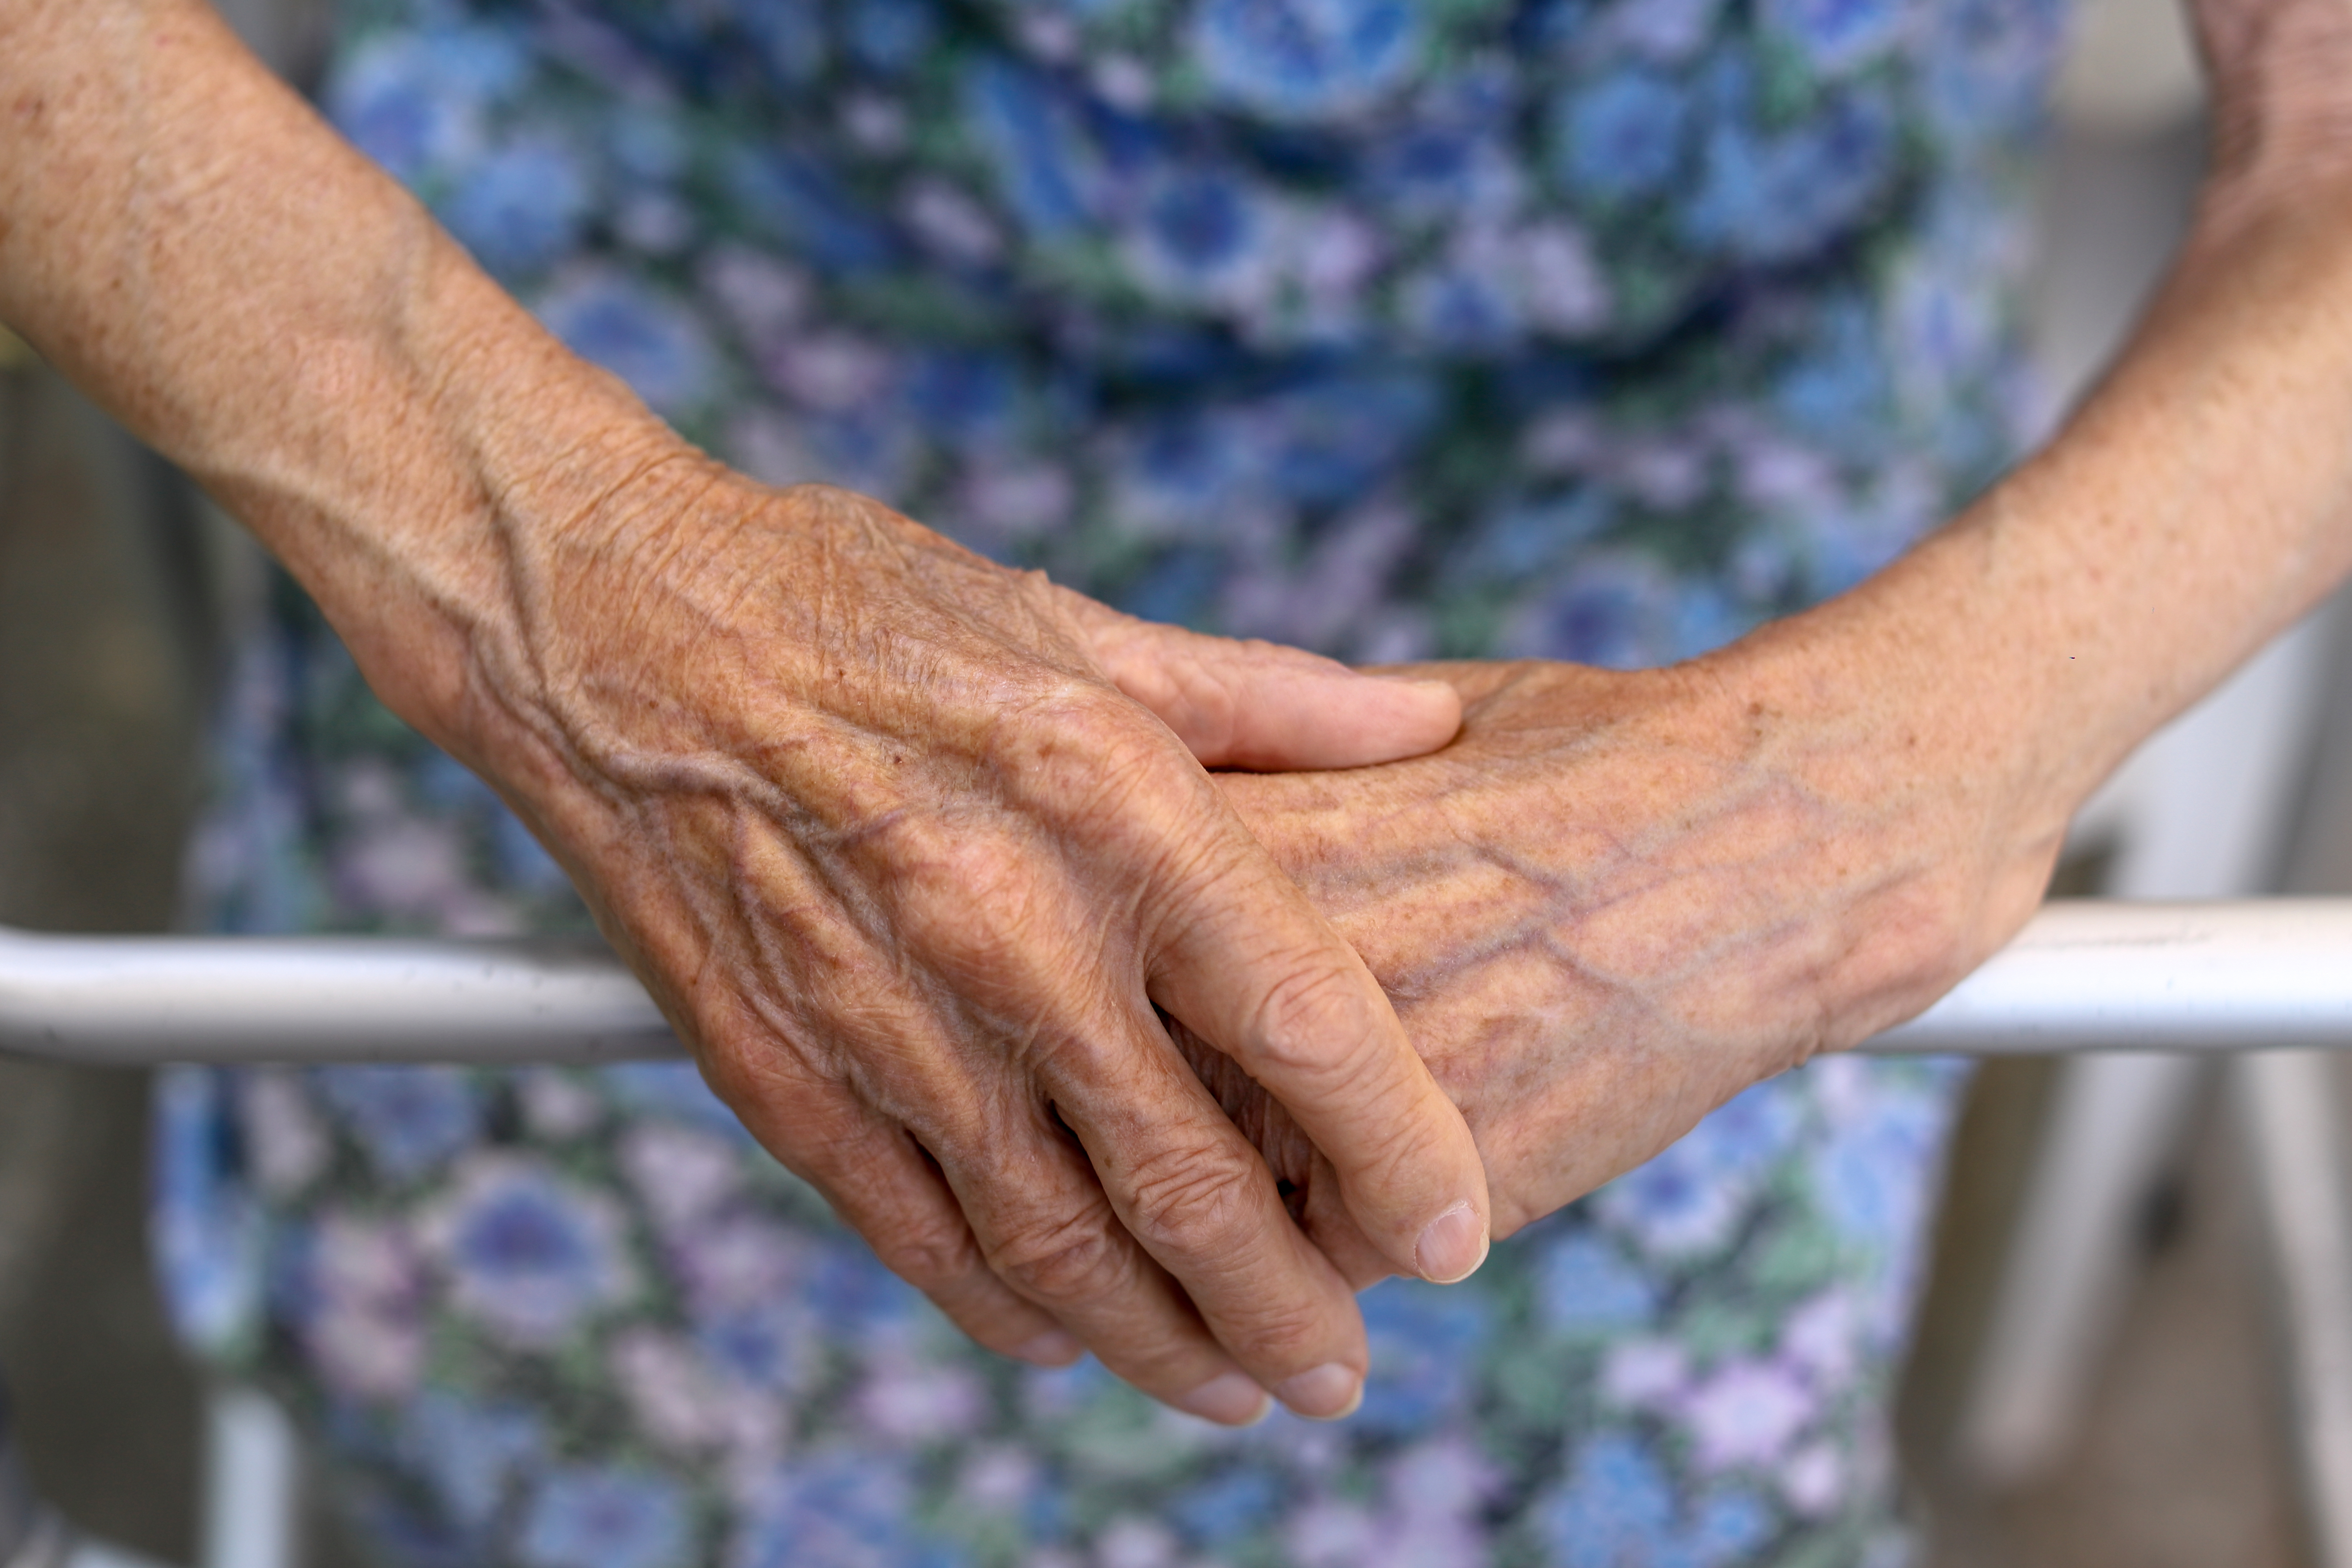 Common Forms of Nursing Home Abuse and Neglect